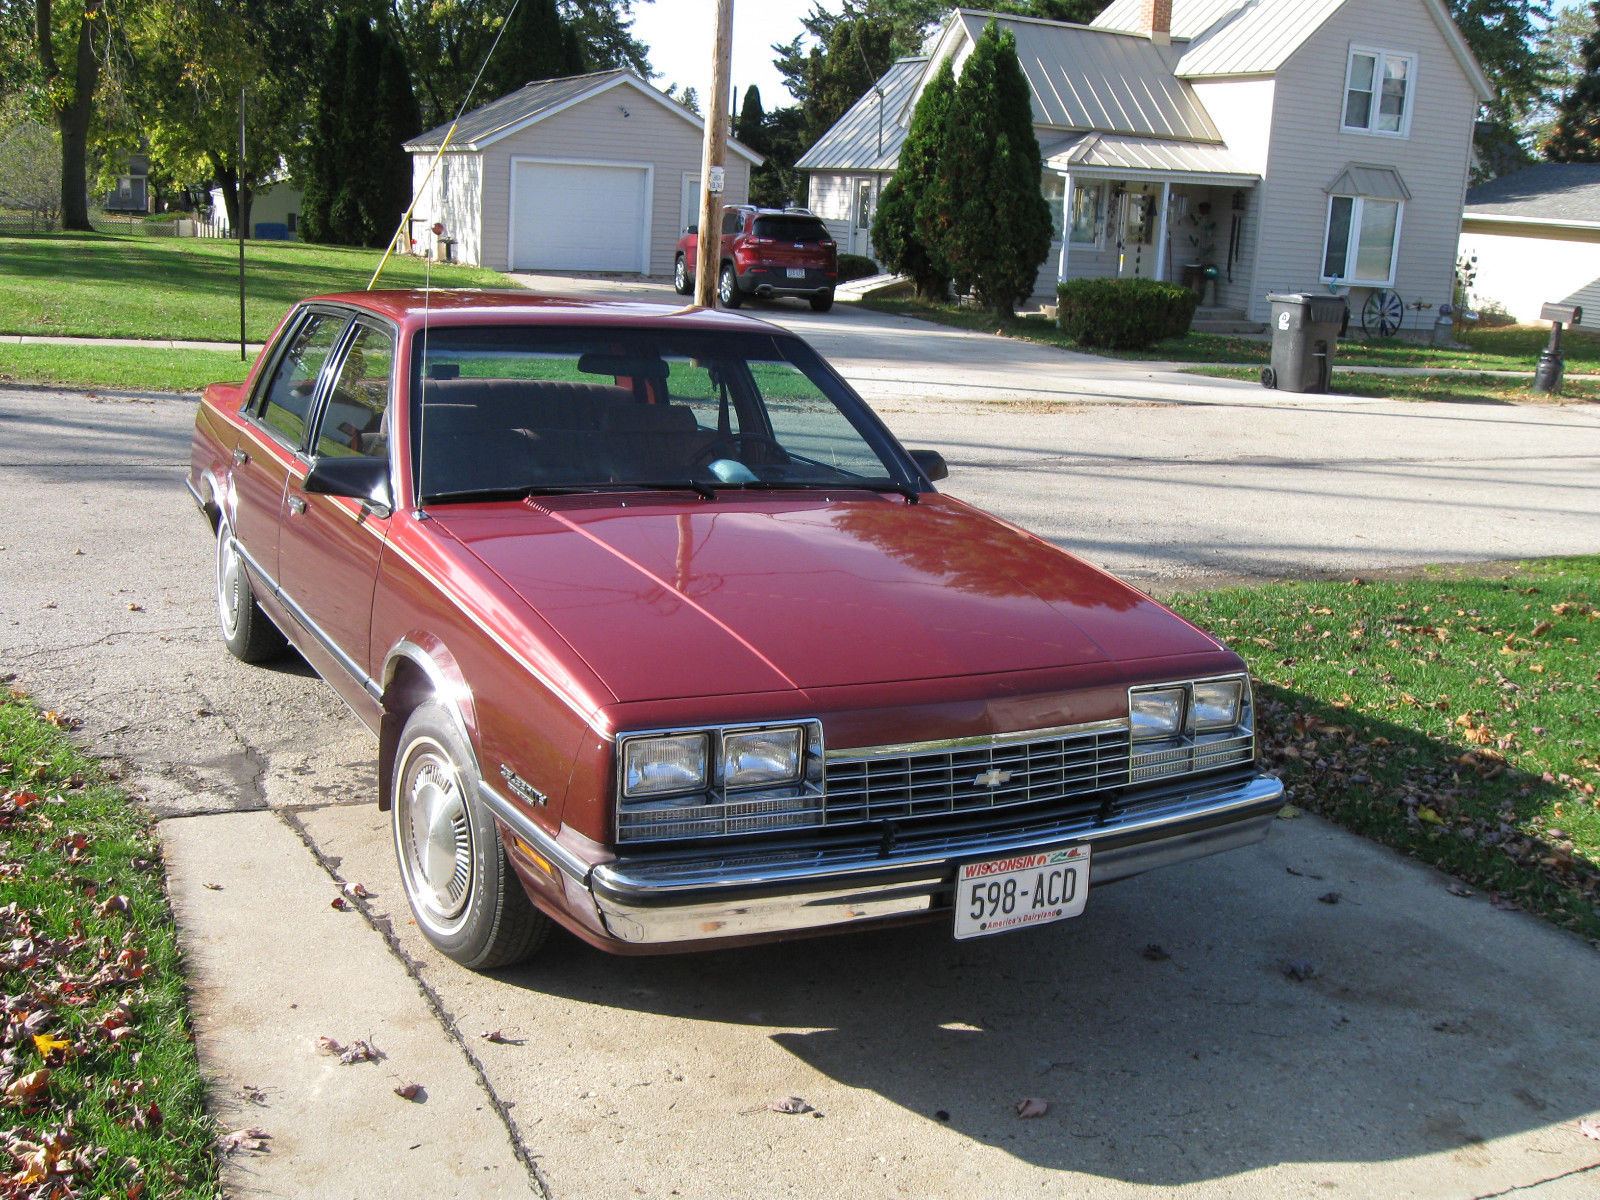 1983 Chevrolet Celebrity – excellent mechanical and cosmetic condition for sale1600 x 1200